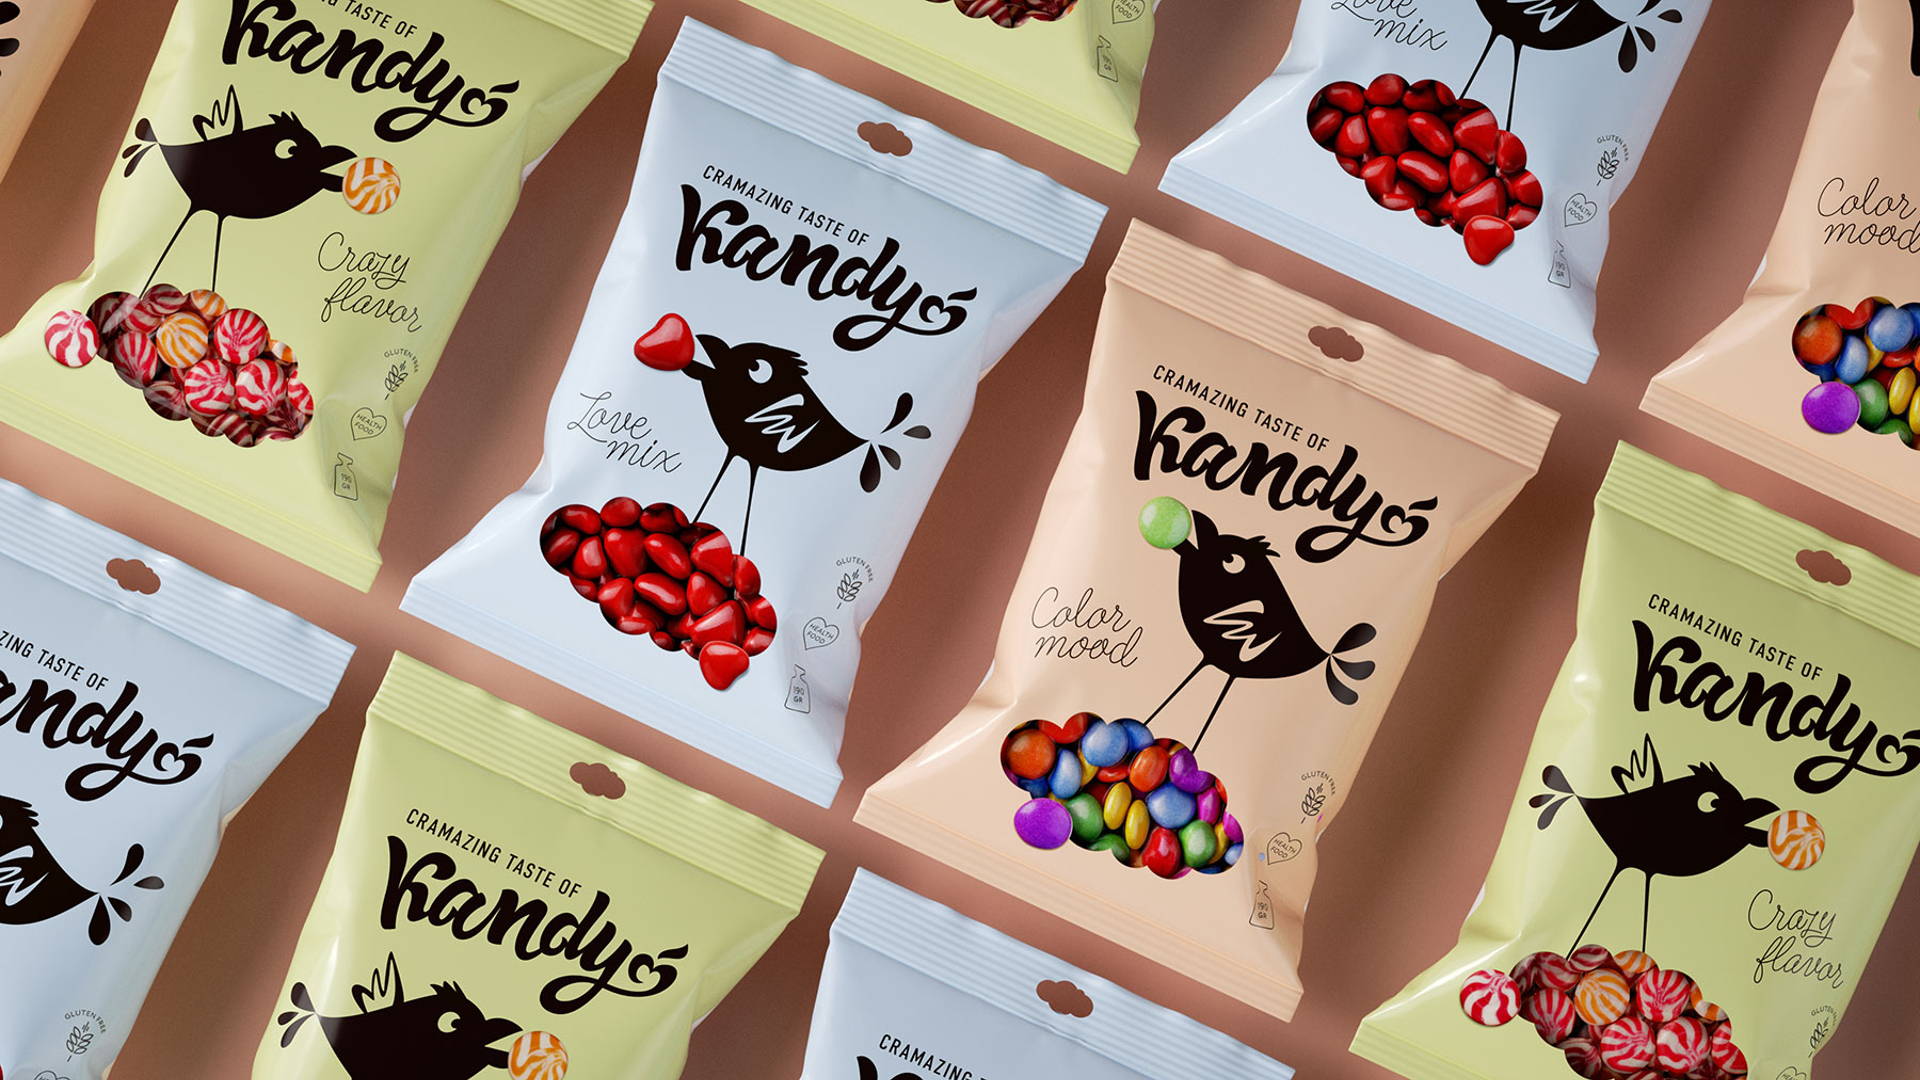 Featured image for This Conceptual Candy Comes With Fun Packaging